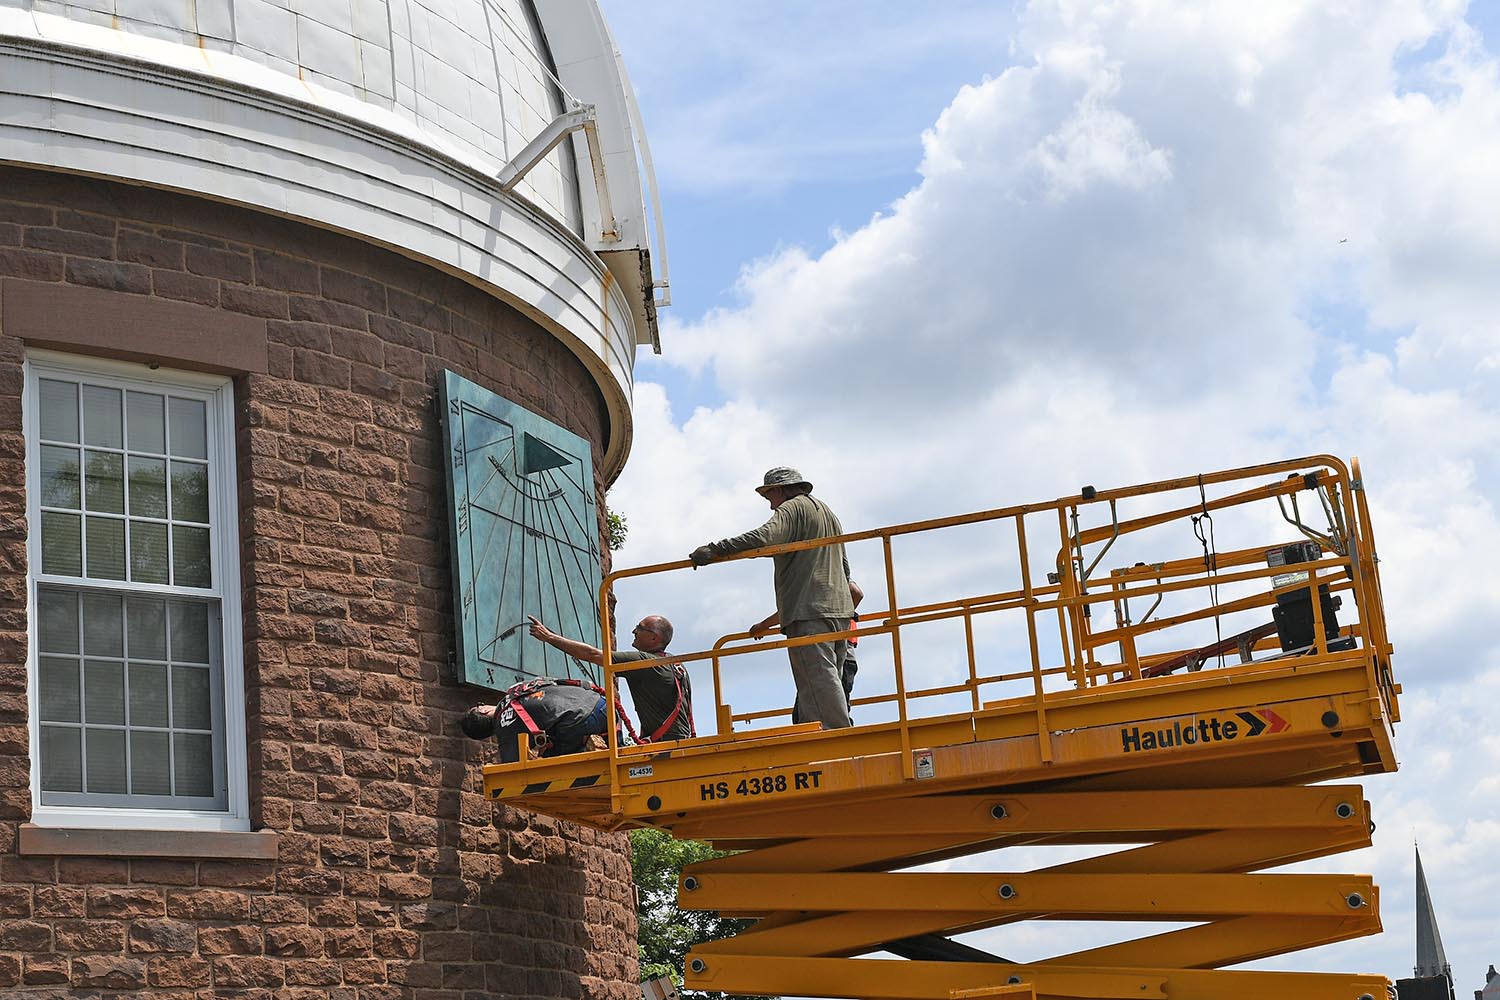 Adzema chose to color the bronze sculpture in a patina. "I chose this green because it is the natural color bronze would oxidize over time. It is also a green that looks great against the color of the Observatory's brownstone walls,"